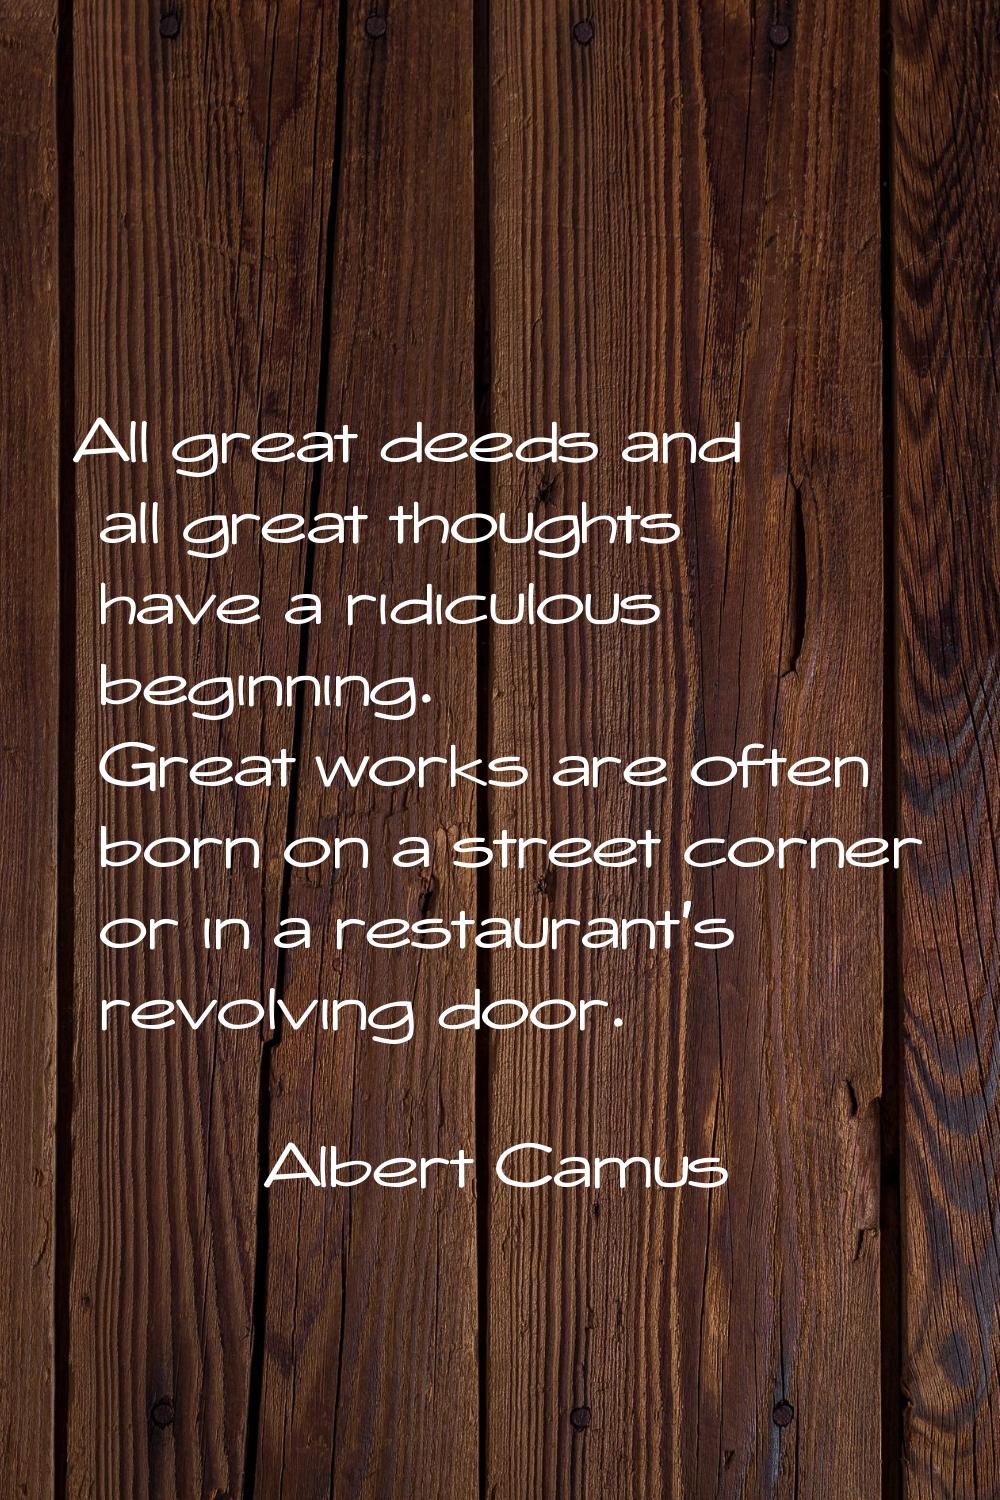 All great deeds and all great thoughts have a ridiculous beginning. Great works are often born on a